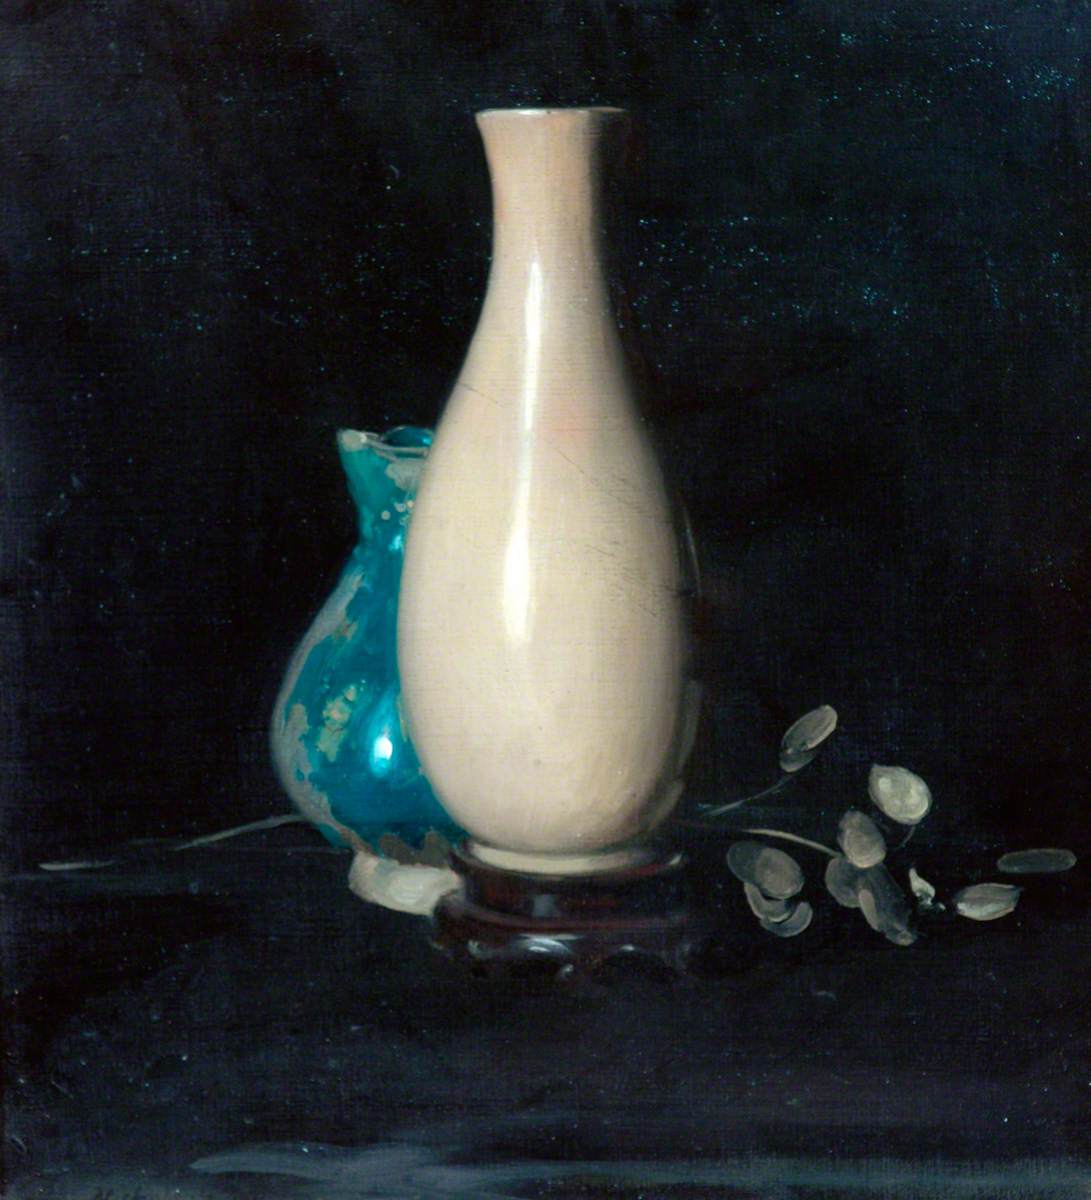 The Chinese Vase